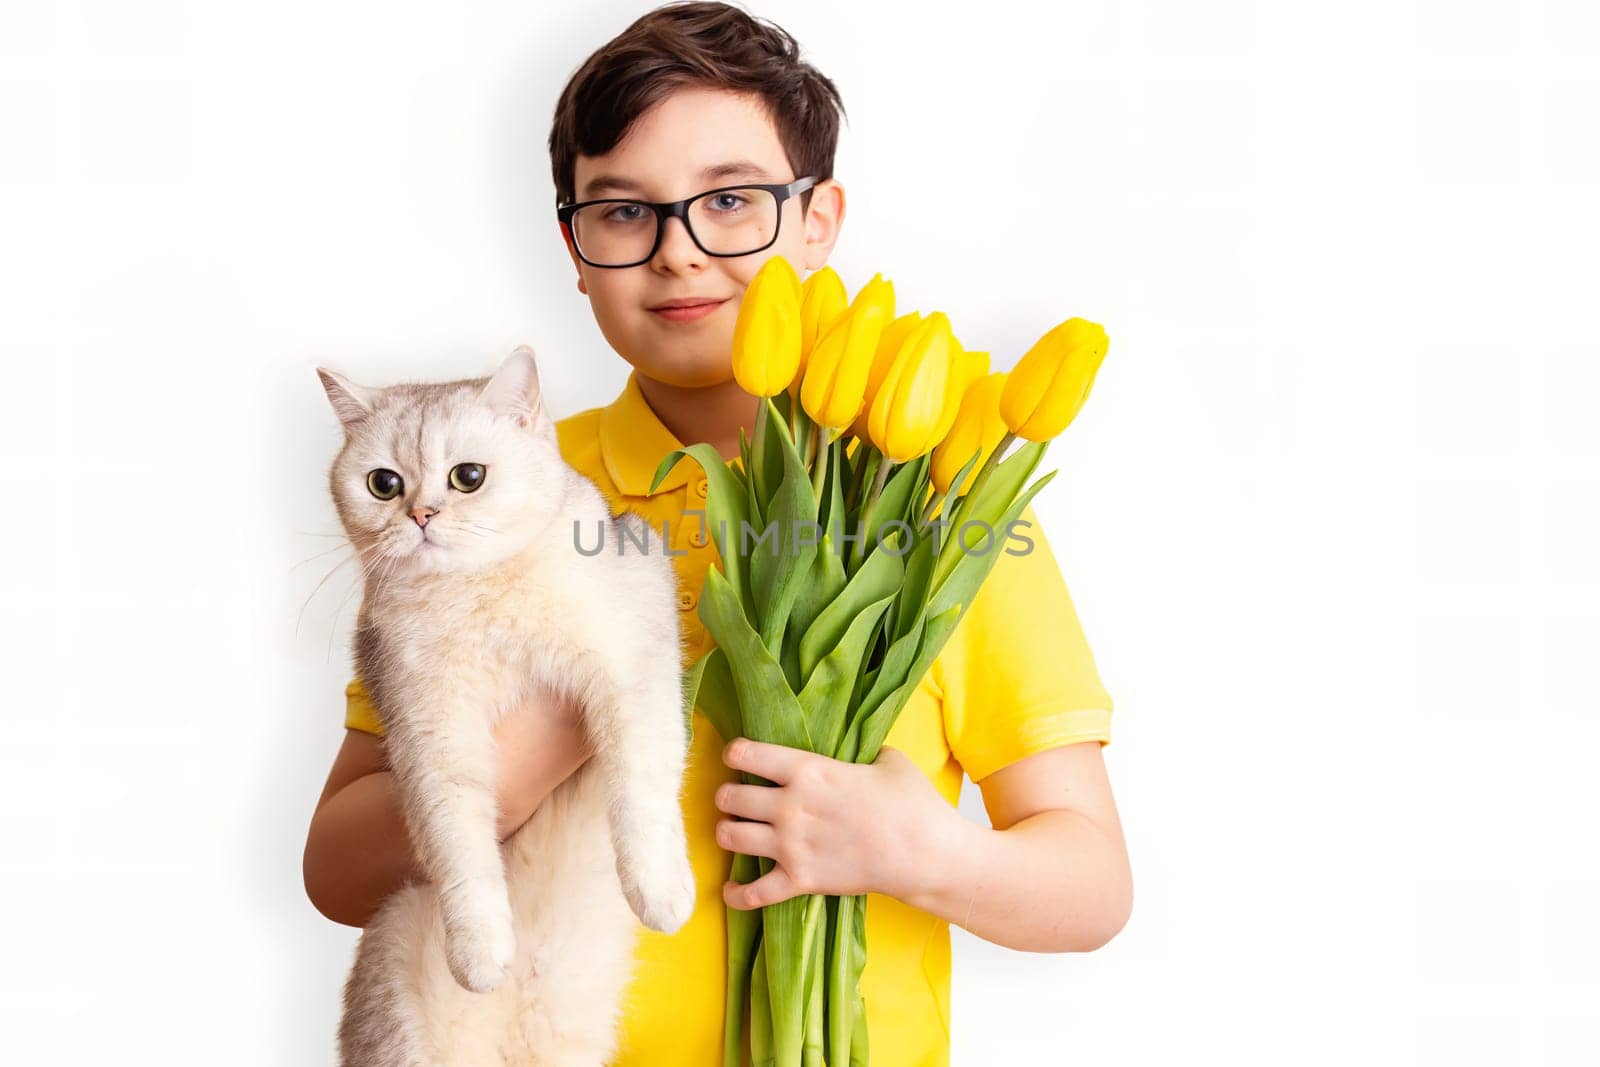 A happy boy holds a cute white cat and bouquet of yellow tulips, on a white background by Zakharova